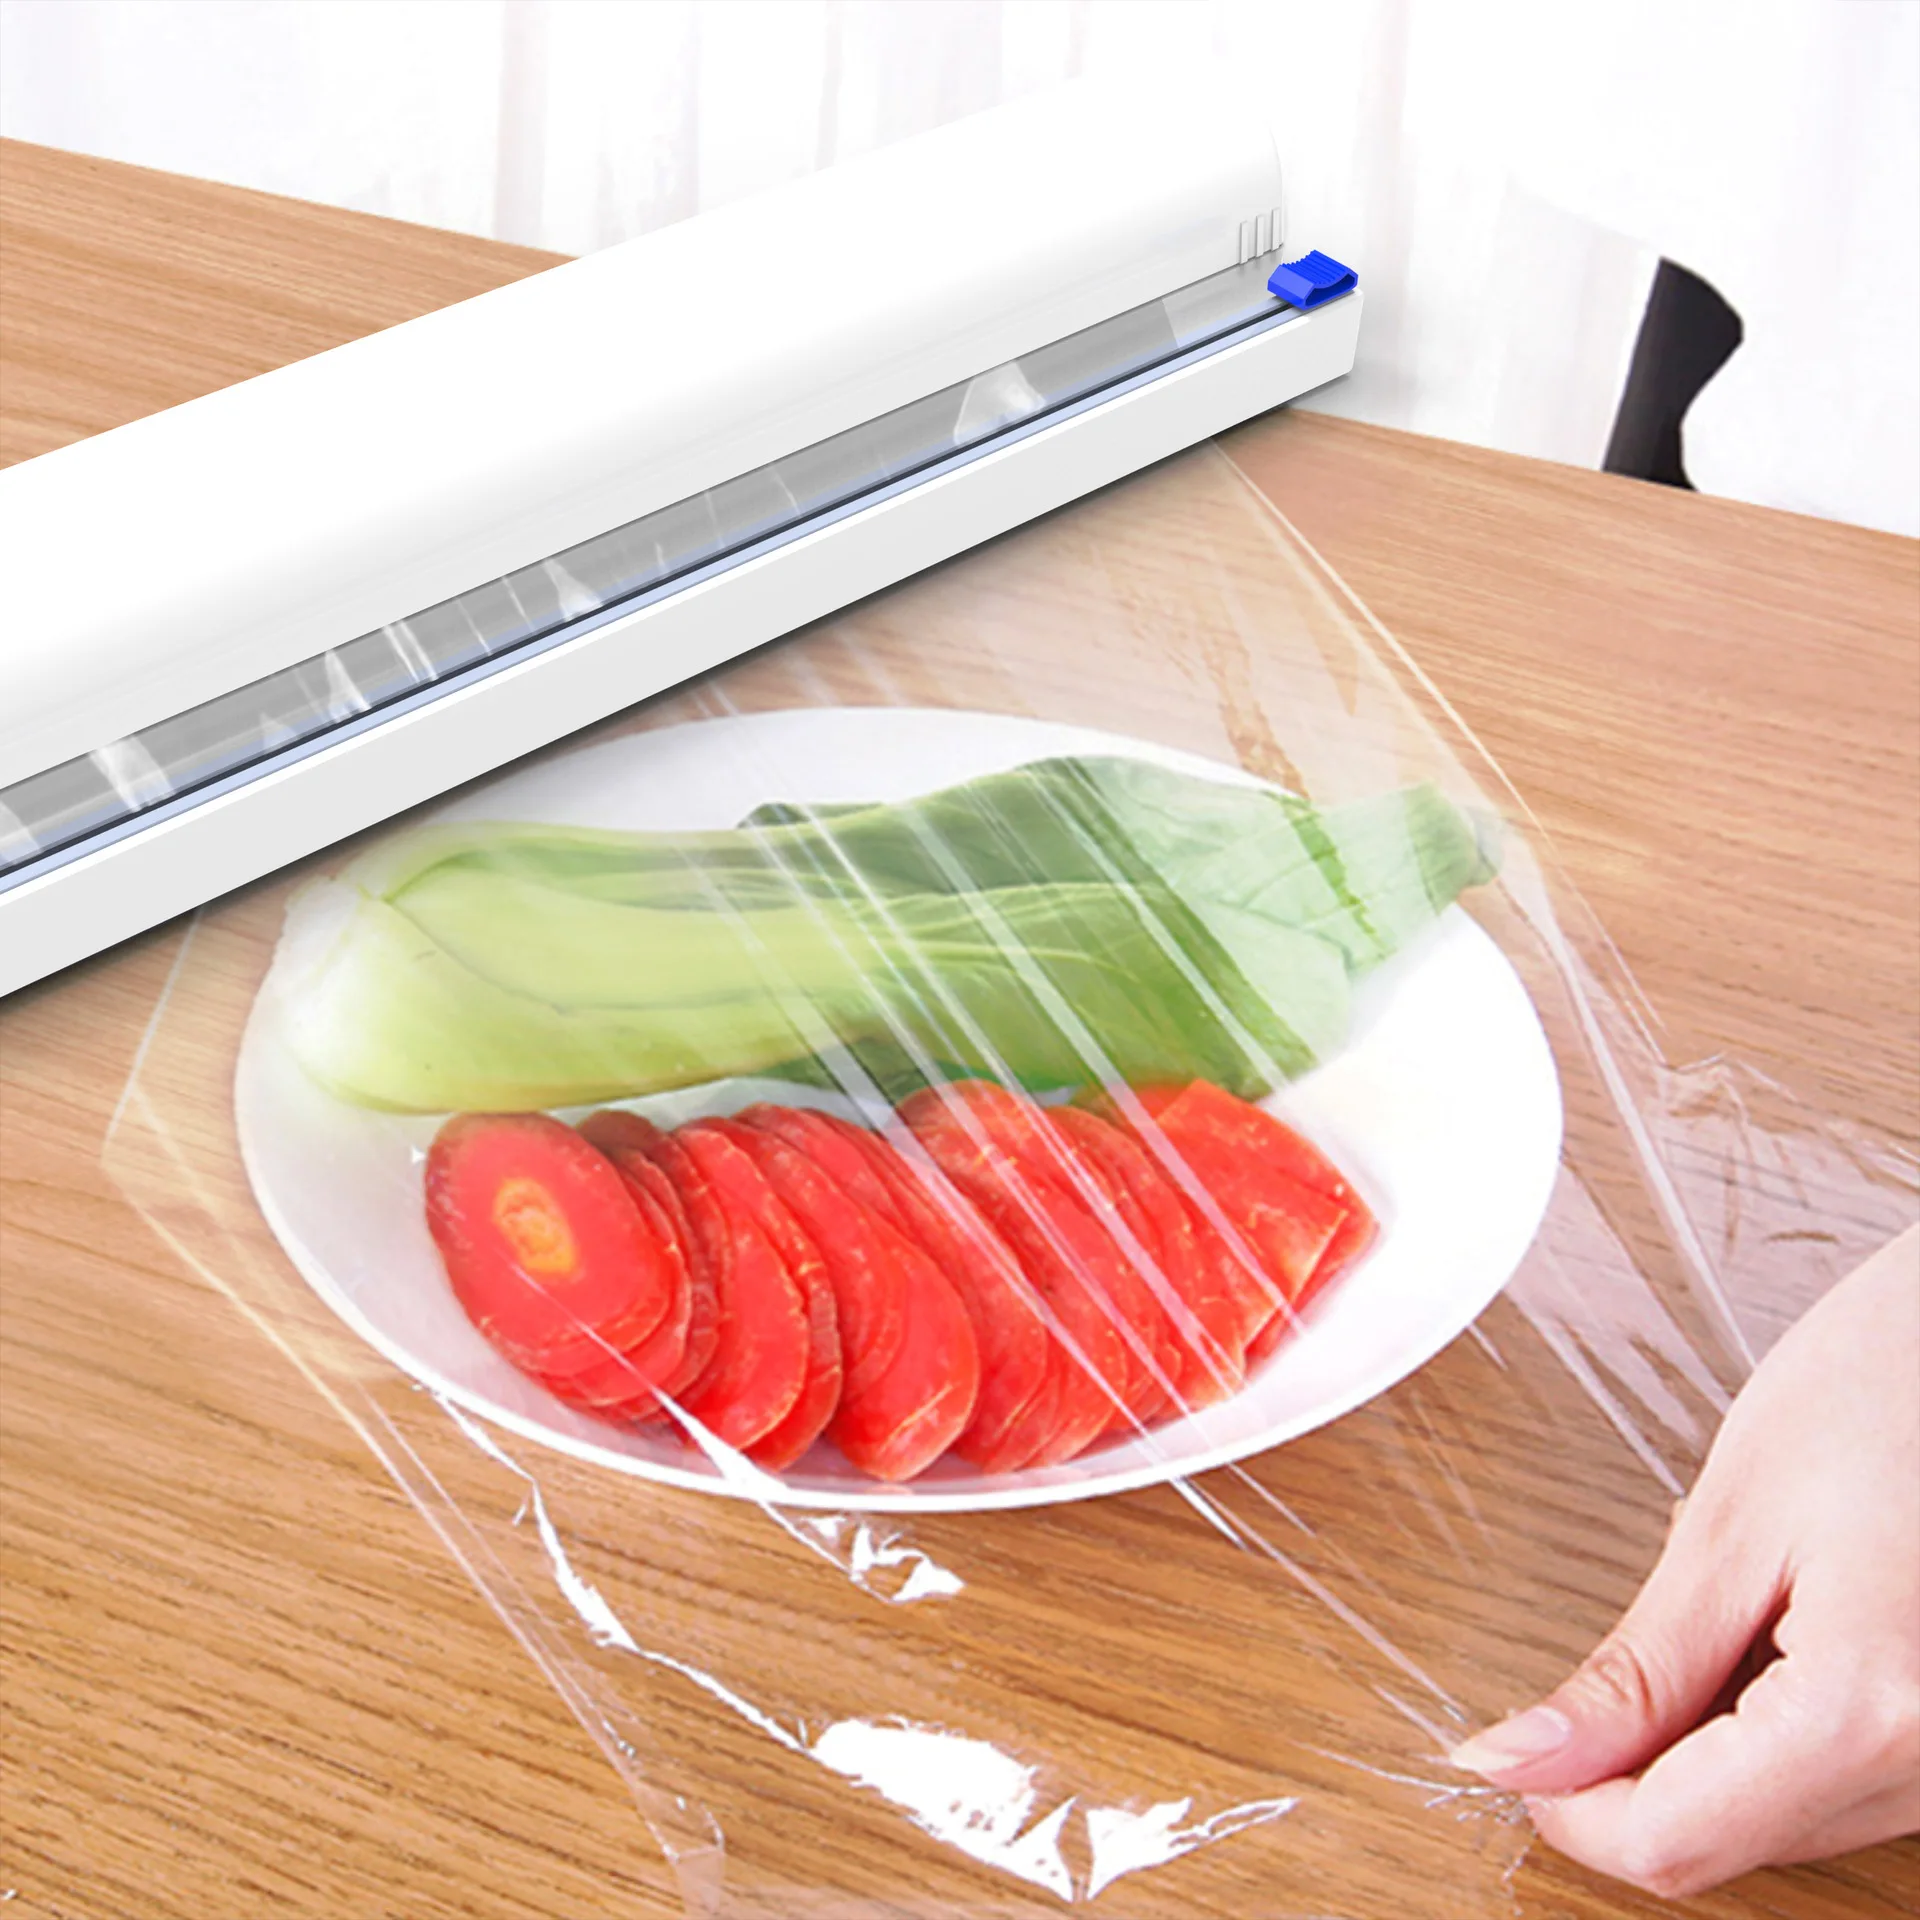 

Suction Cup Household Fresh Food Fruit Cling Film Cutting Machine house amazon top seller 2021 for home, White or customized